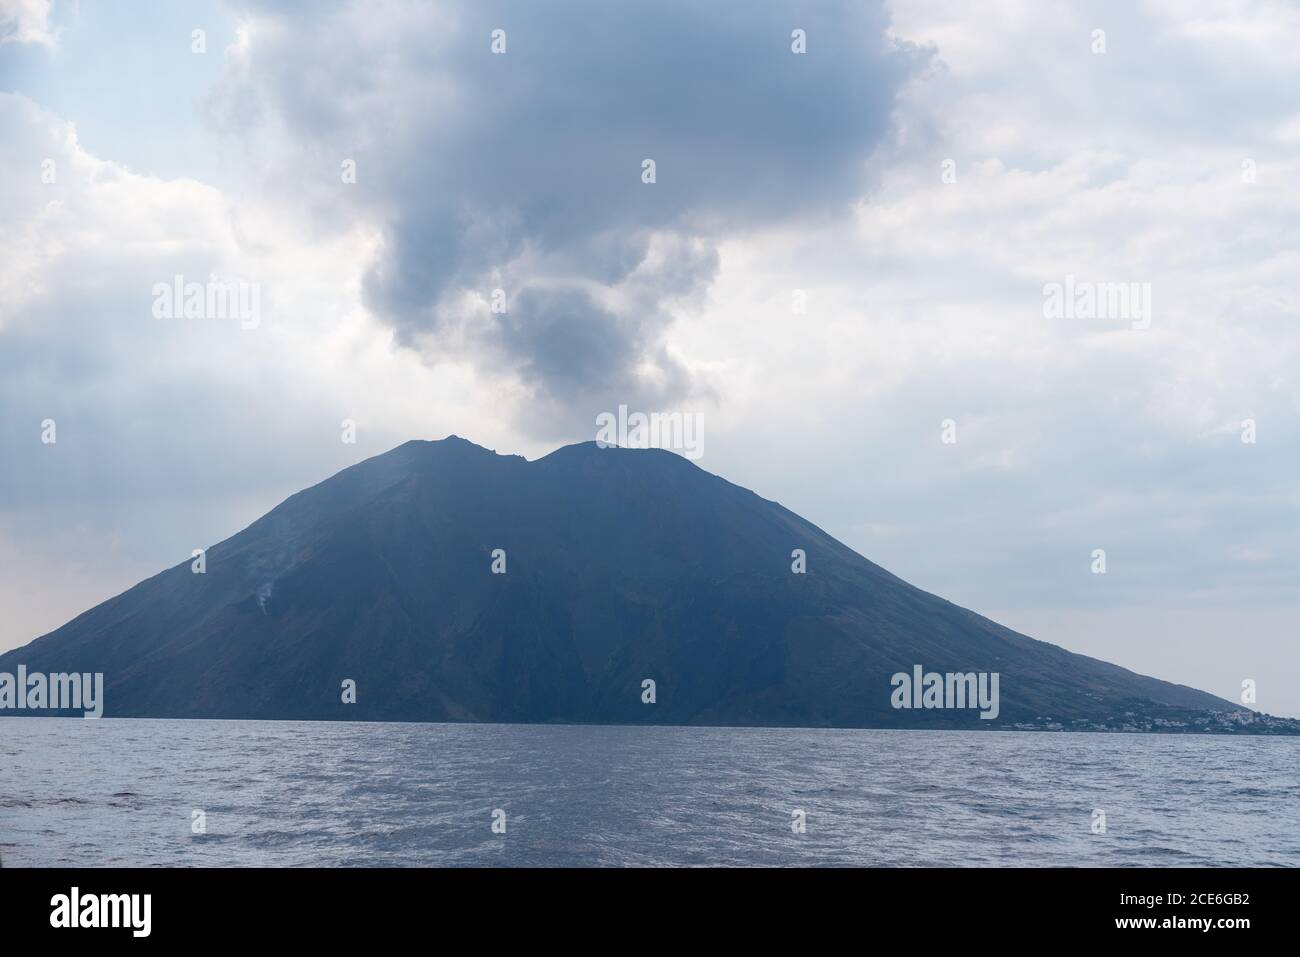 Cloud of smoke over the active Stromboli volcano in Italy Stock Photo